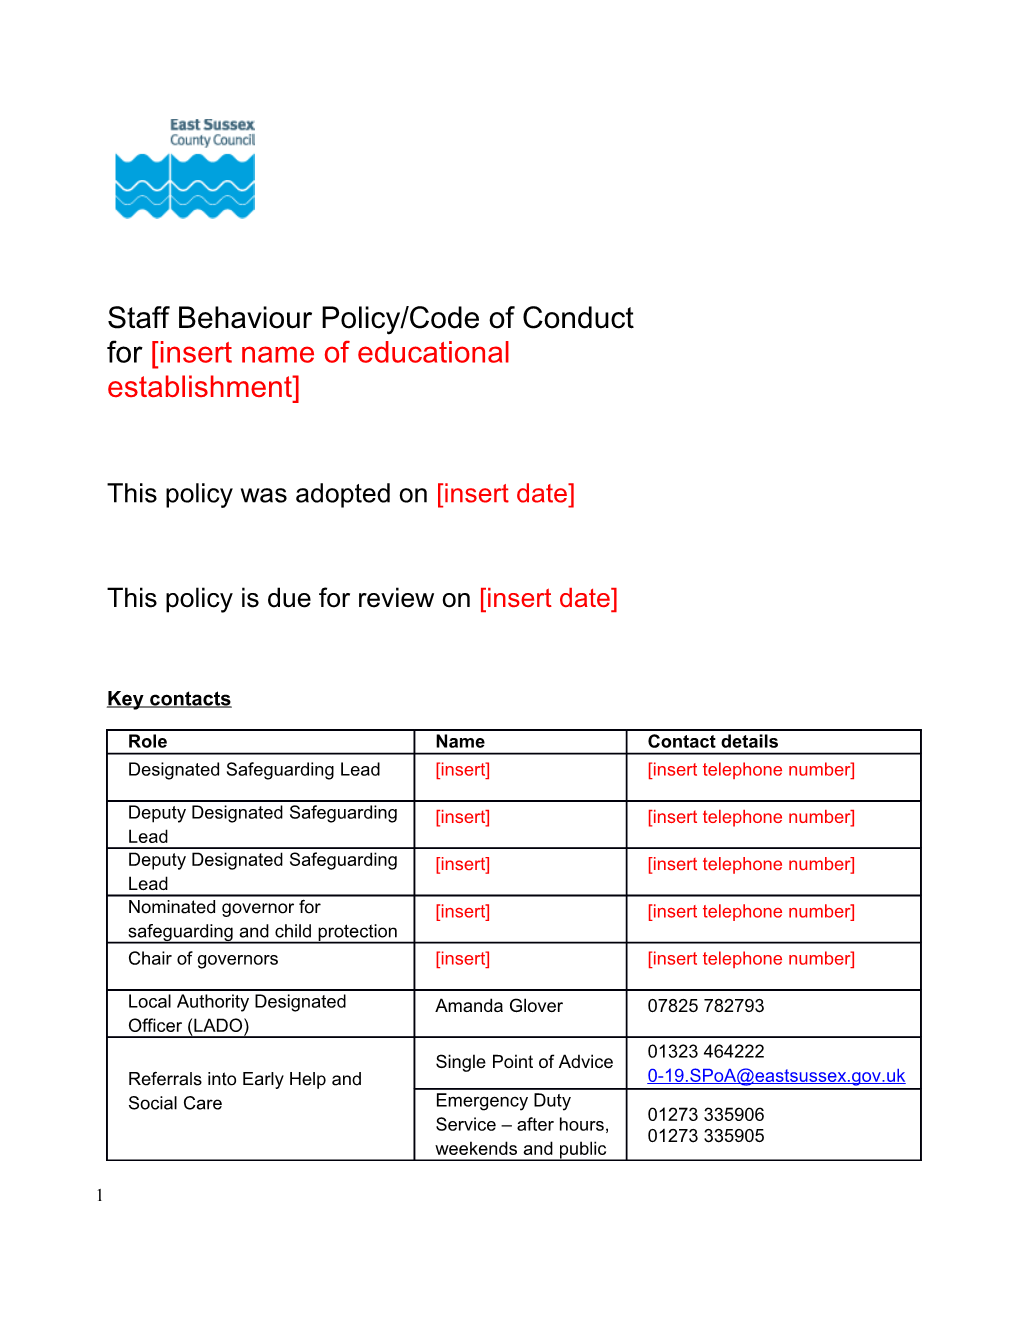 Staff Behaviour Policy/Code of Conduct for Insert Name of Educational Establishment